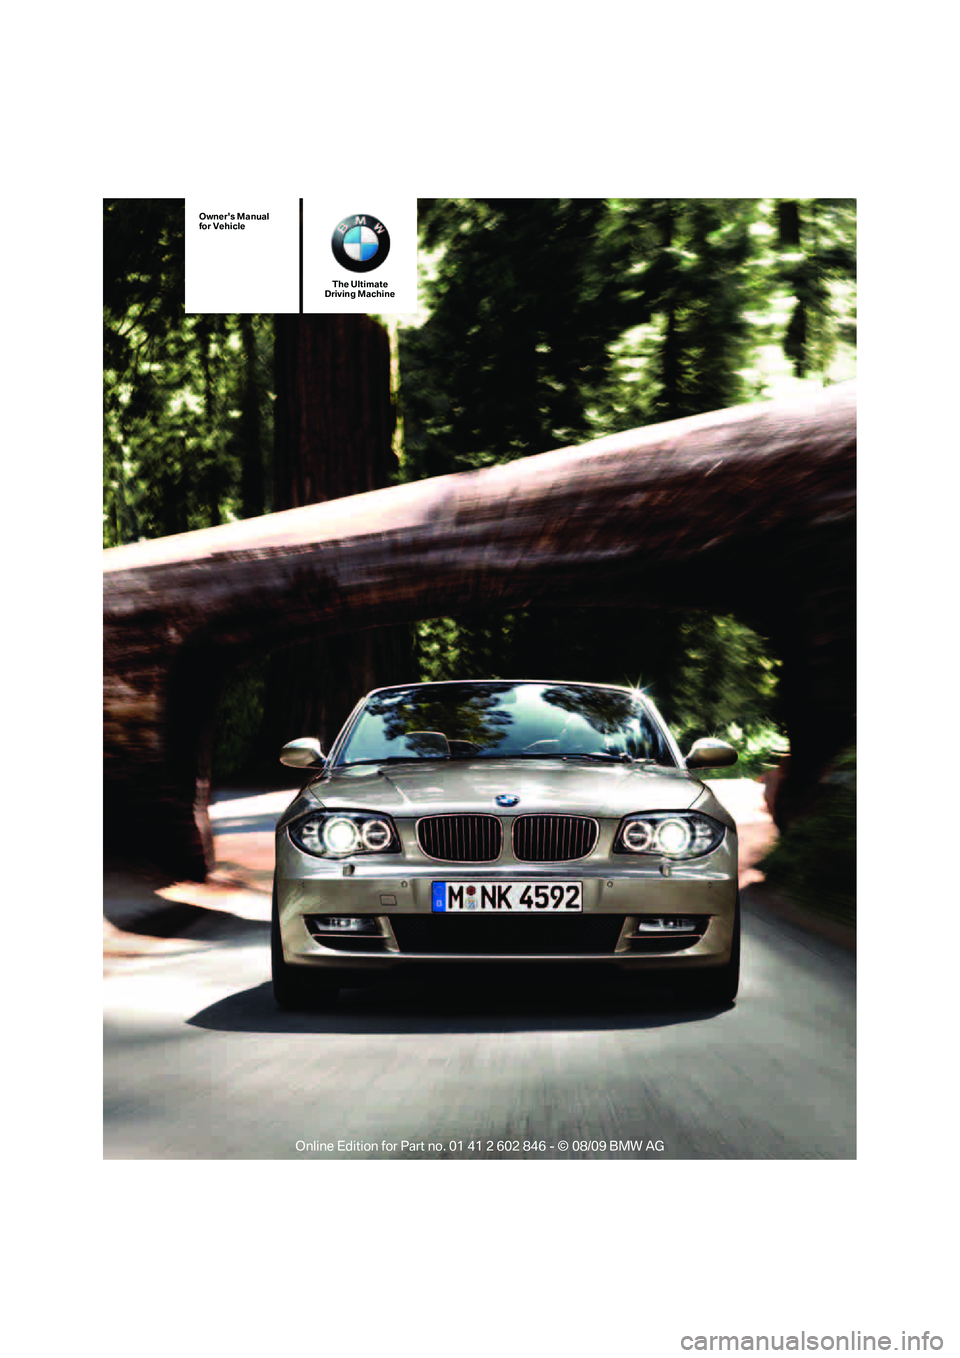 BMW 128I CONVERTIBLE 2010  Owners Manual The Ultimate
Driving Machine
Owners Manual
for Vehicle 